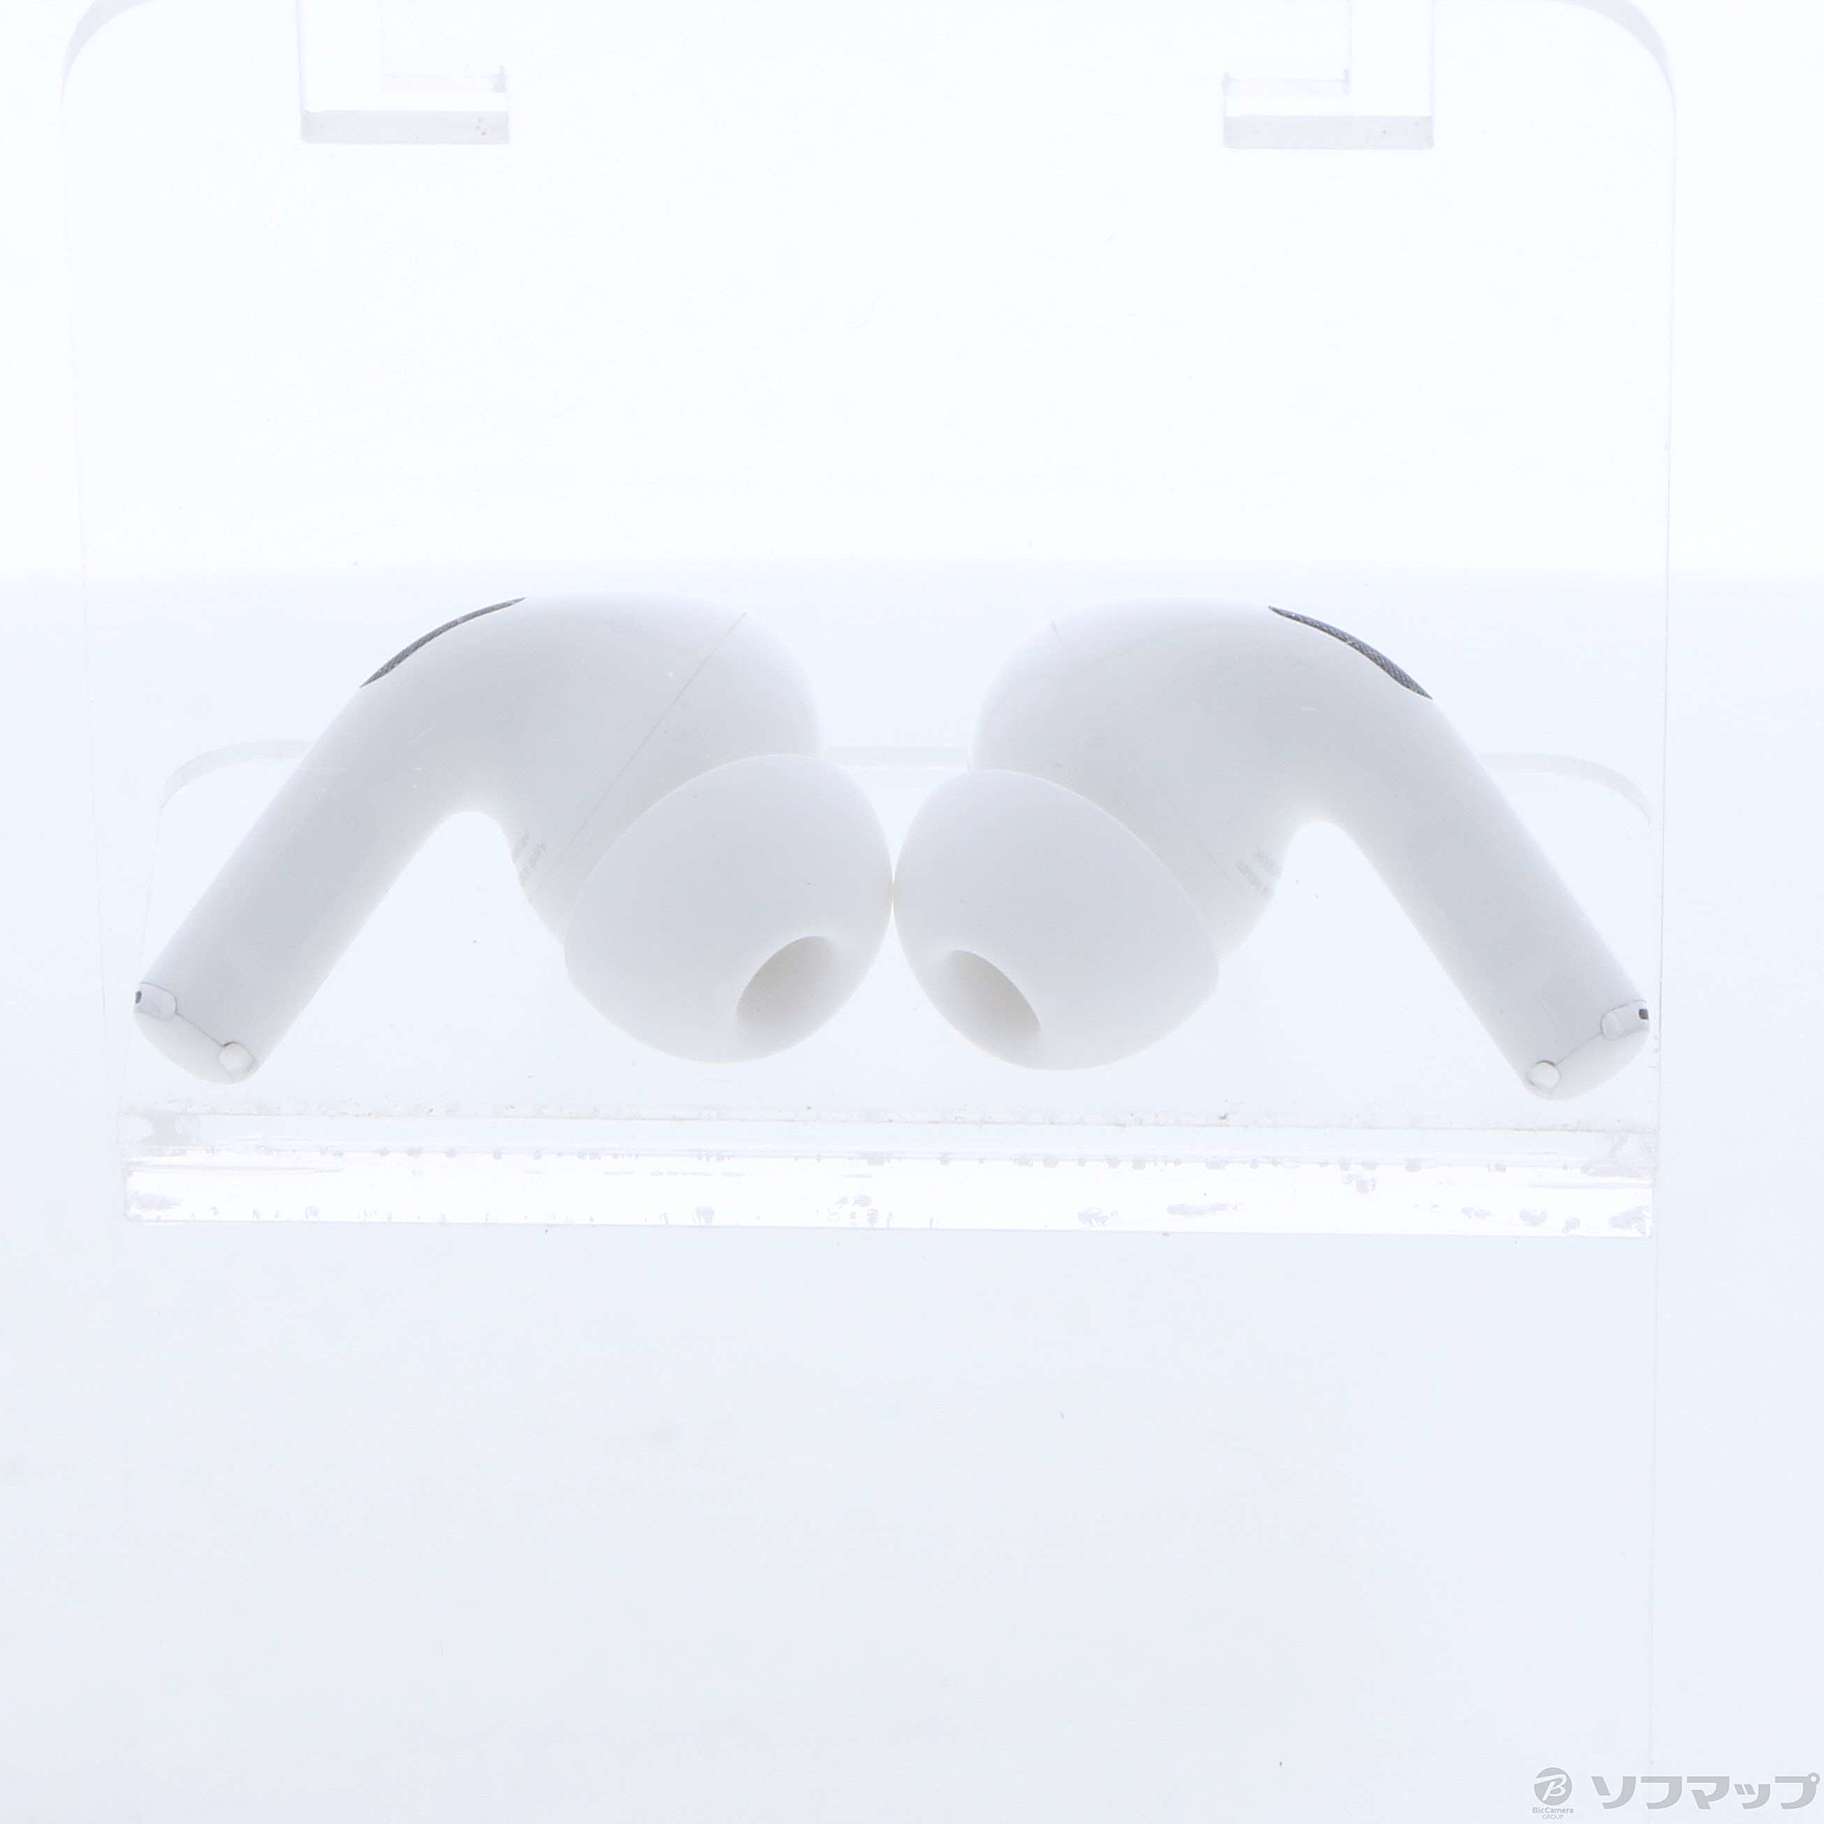 AirPods Pro 第1世代 PWP22J／A ◇10/04(火)値下げ！